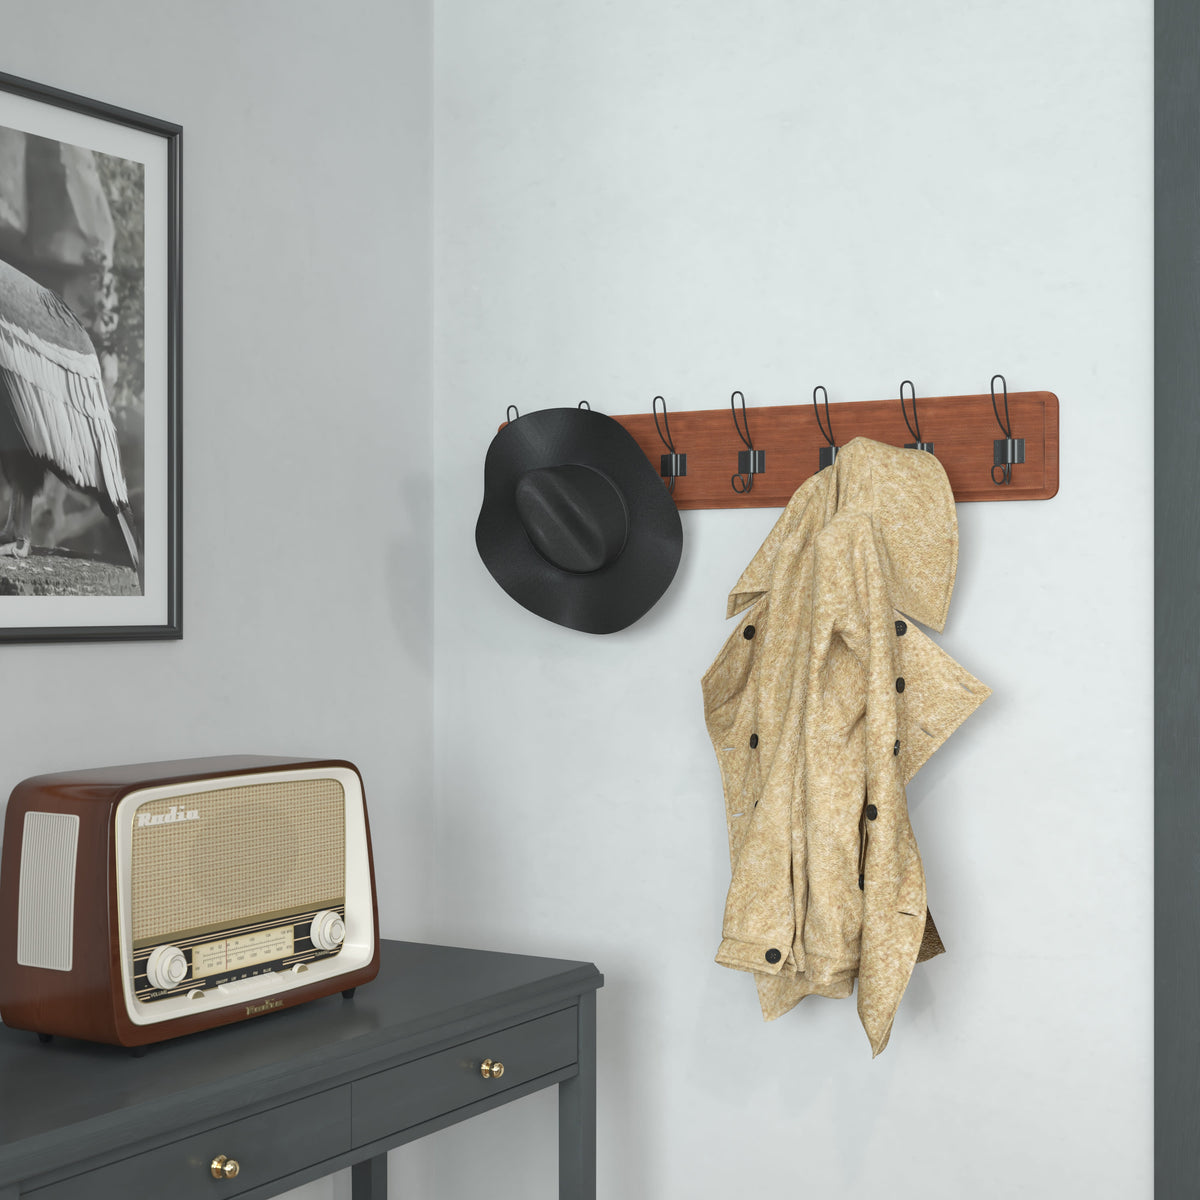 Brown |#| Vintage Wall Mounted Storage Rack with 7 Hooks in Brown Finish